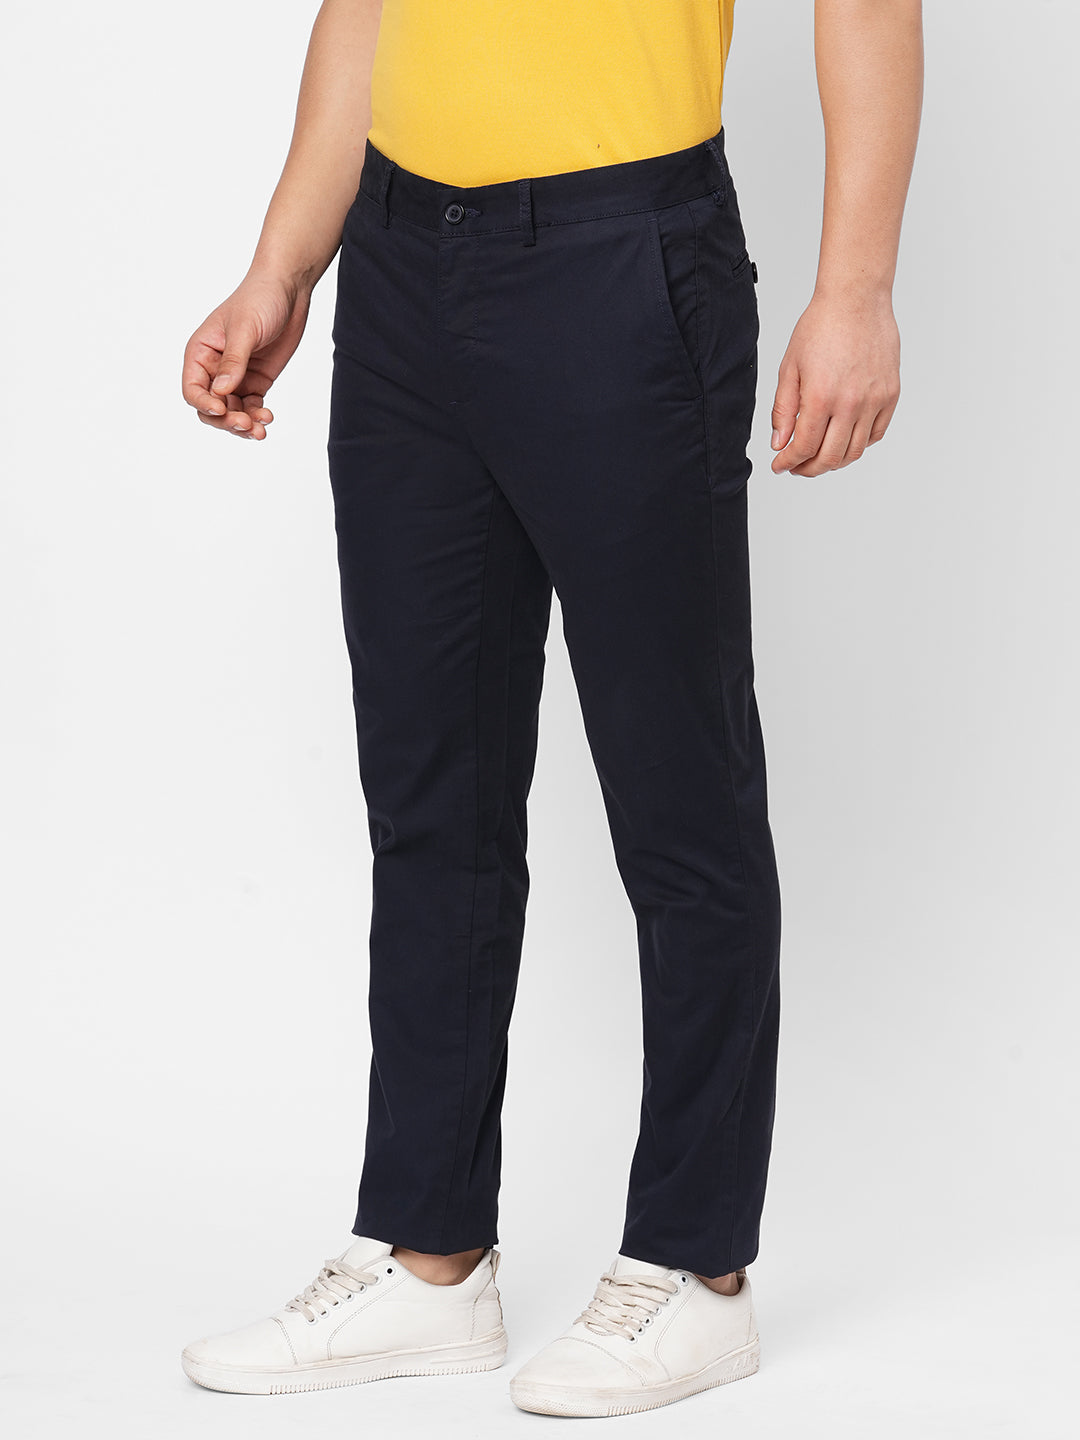 Buy Ladies Trousers Online  Palazzos for Women  Ketch